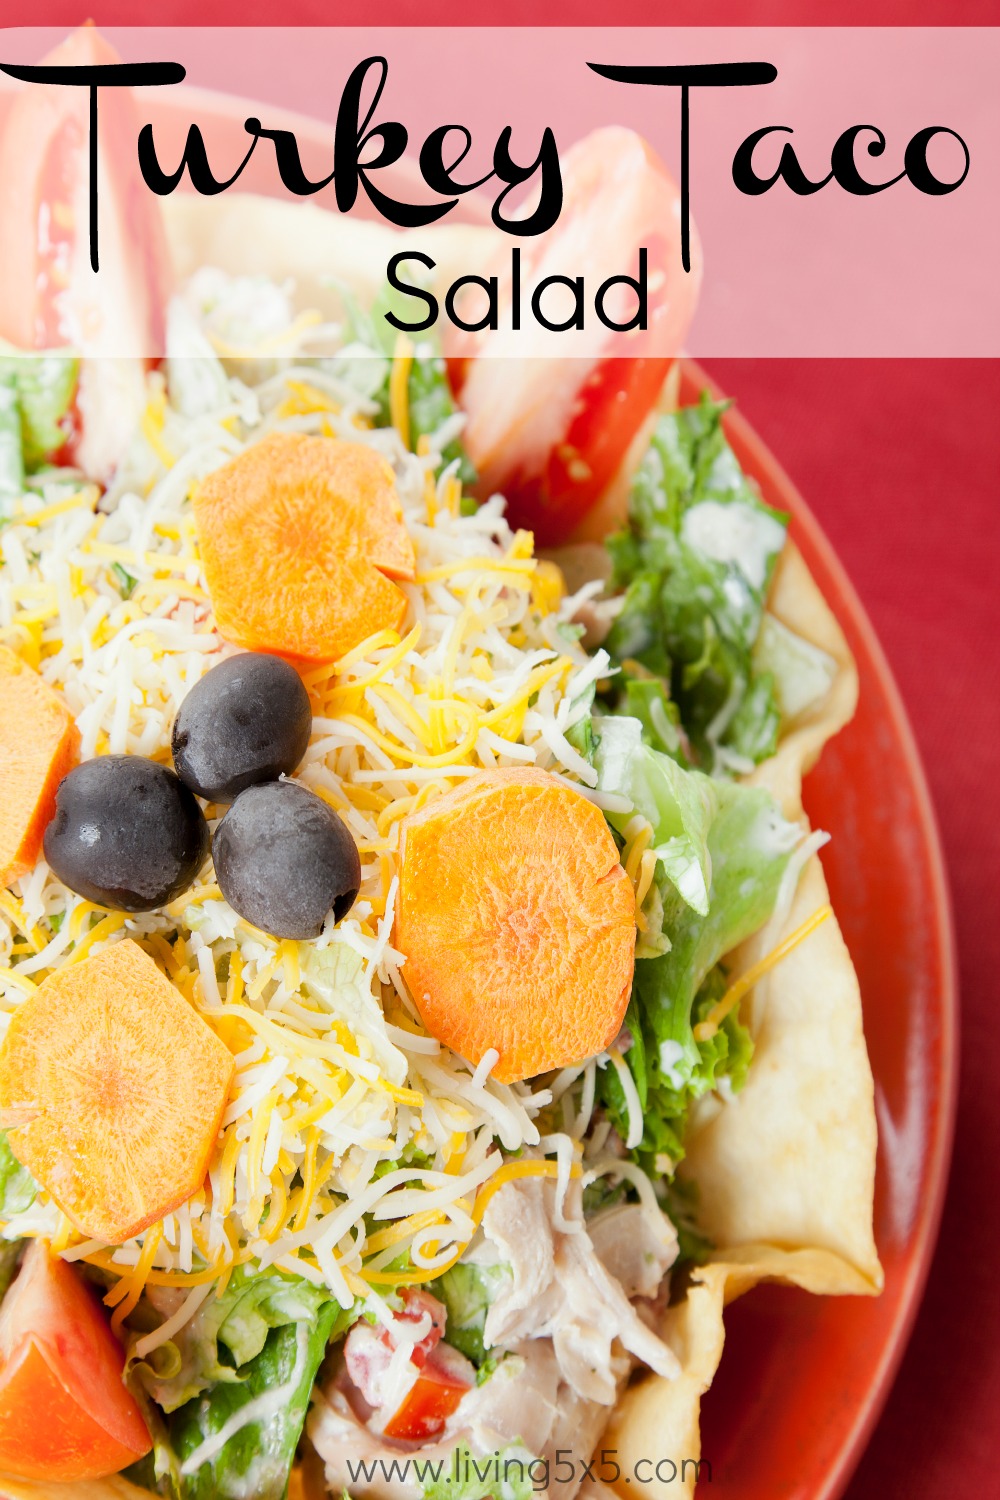 Enjoy this easy turkey taco salad recipe! Make more by doubling the recipe. 